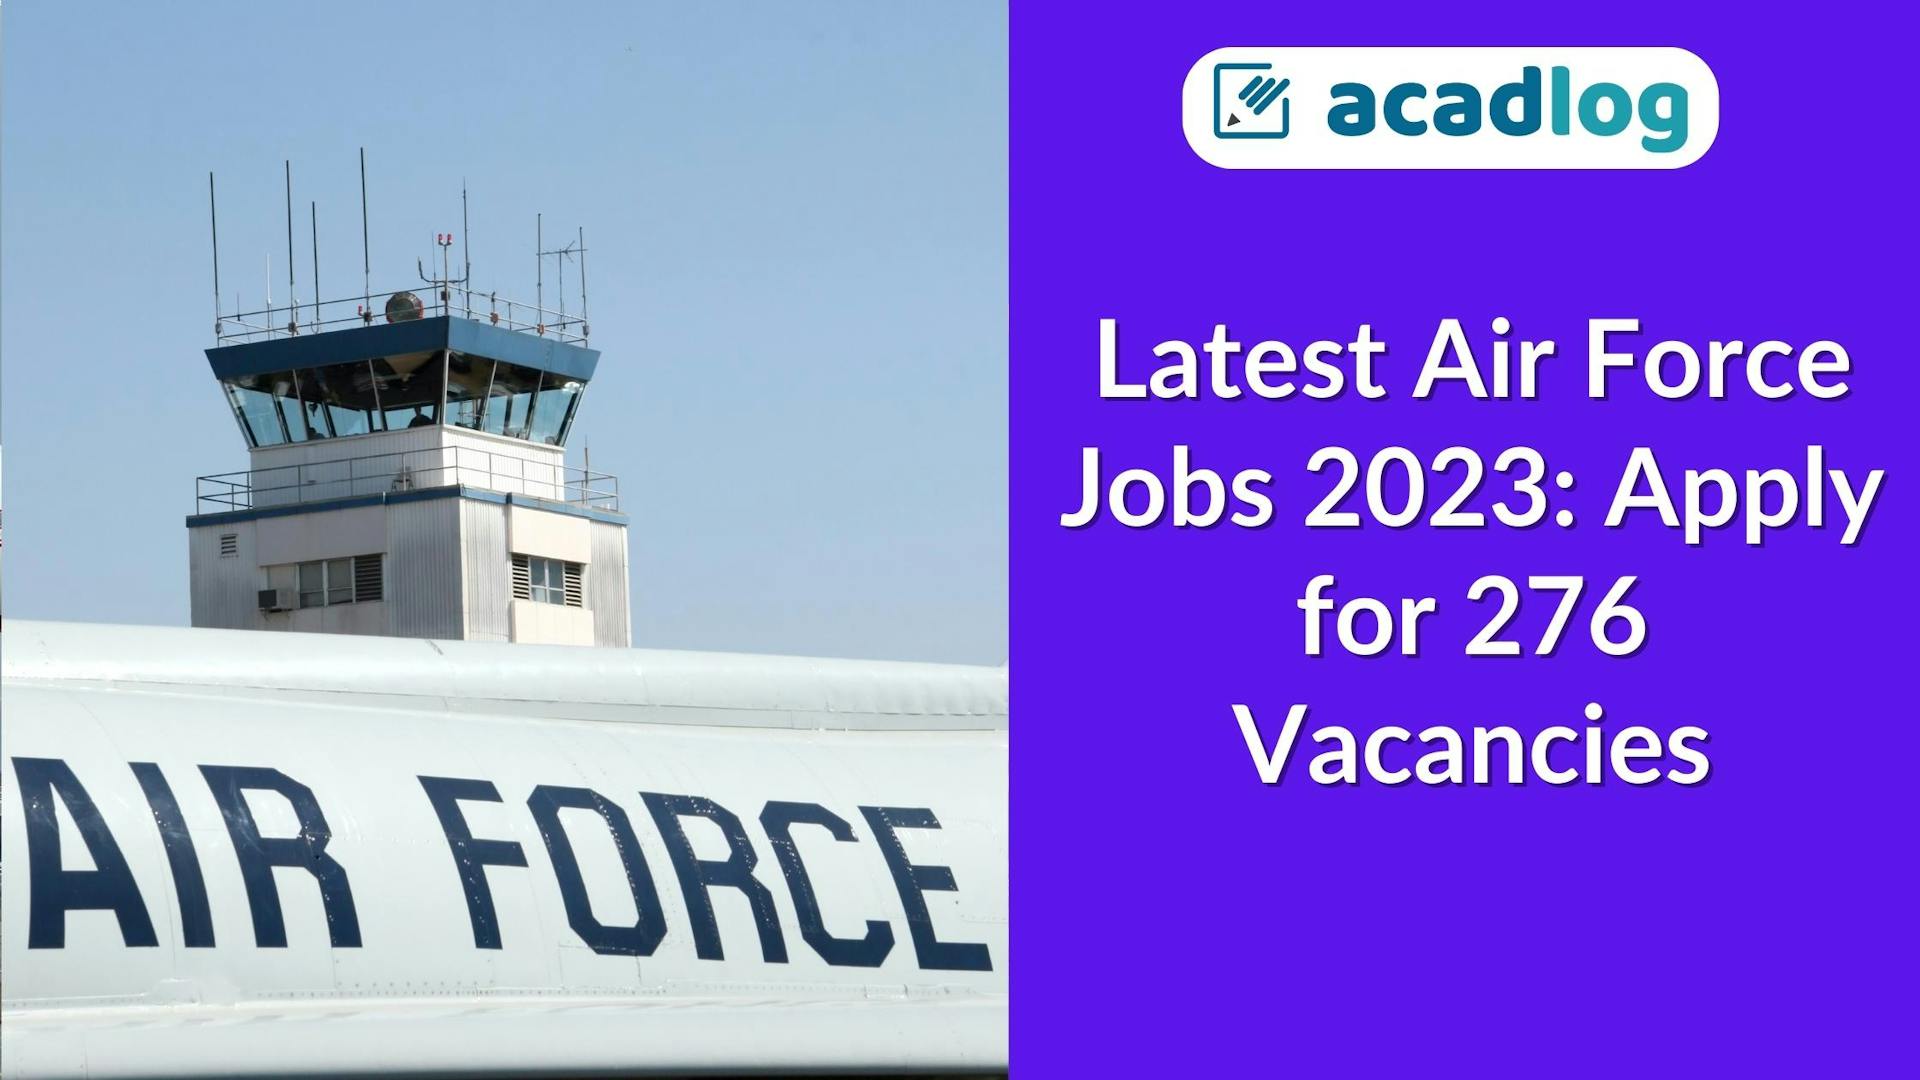 Latest Air Force Jobs 2023: Apply for 276 Vacancies